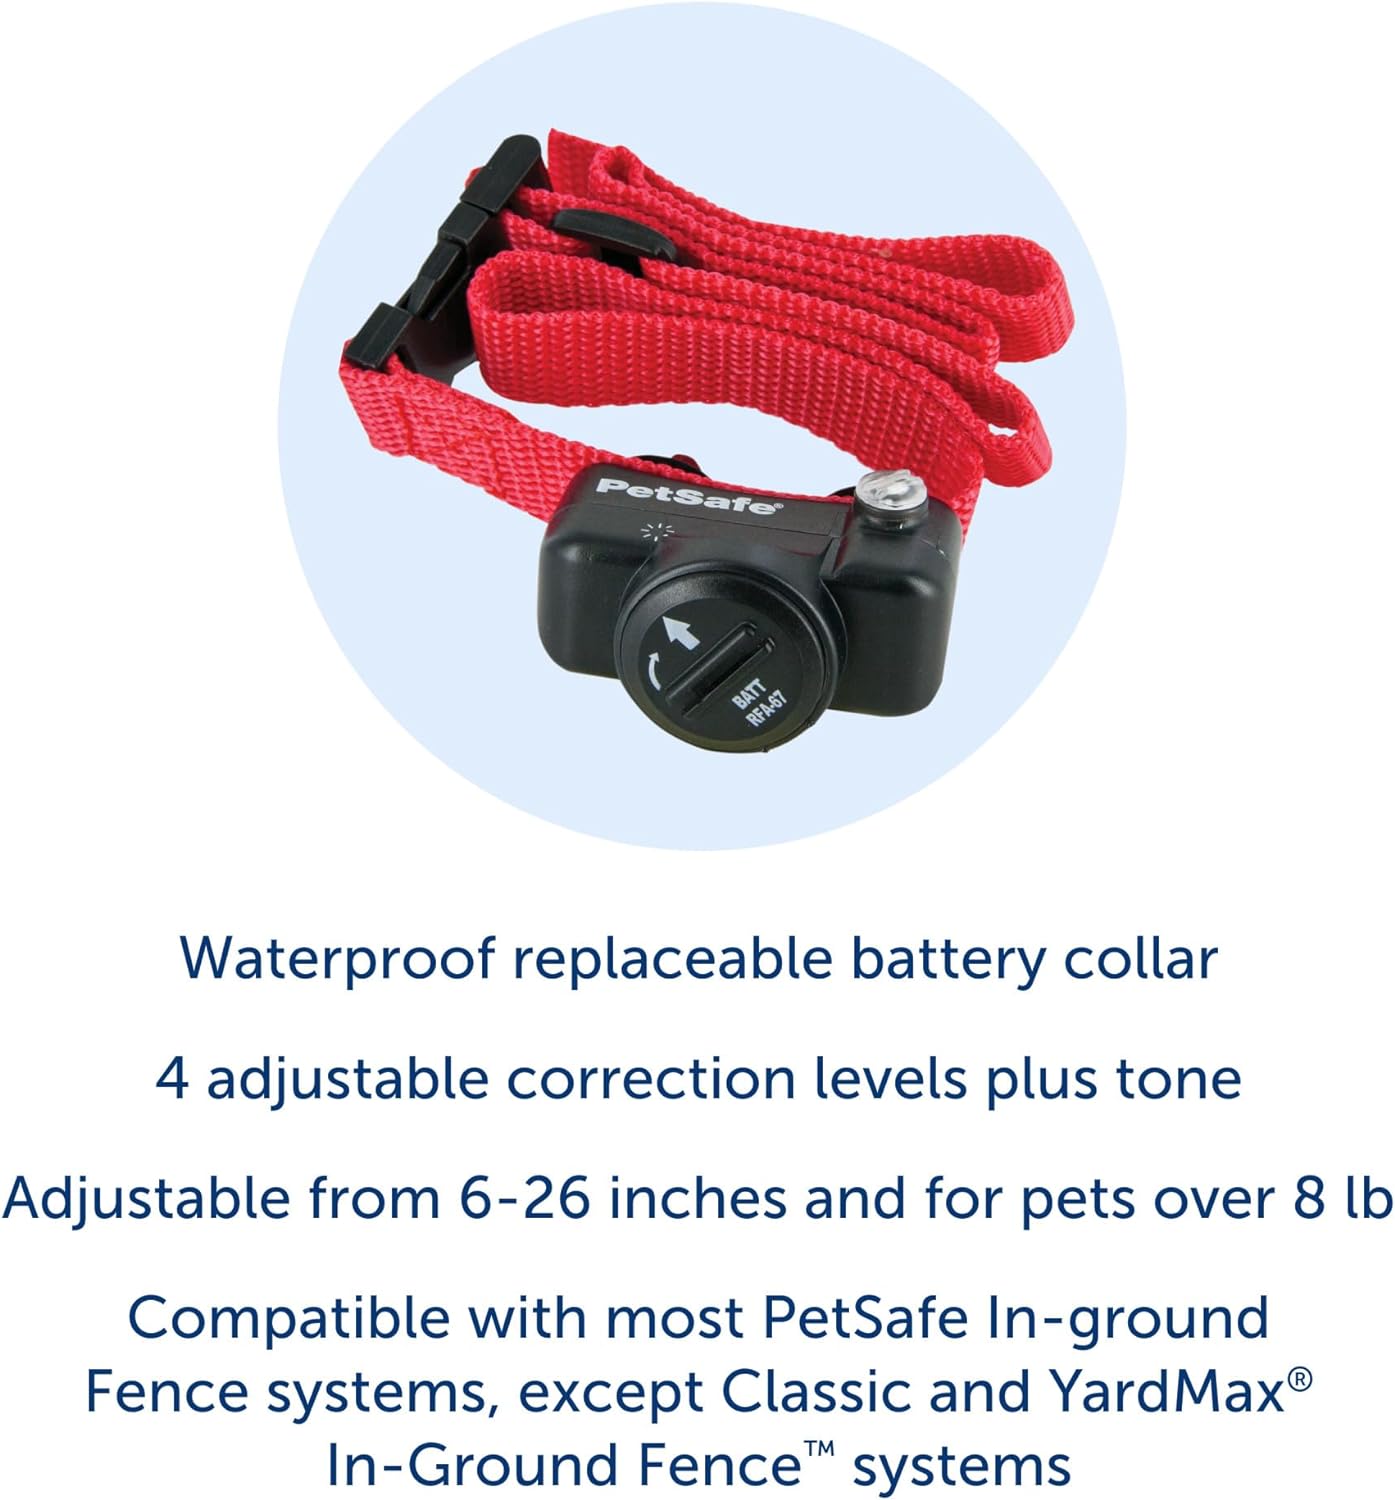 PetSafe Basic In-Ground Pet Fence – from the Parent Company of INVISIBLE FENCE Brand - Underground Electric Pet Fence System with Waterproof and Battery-Operated Training Collar